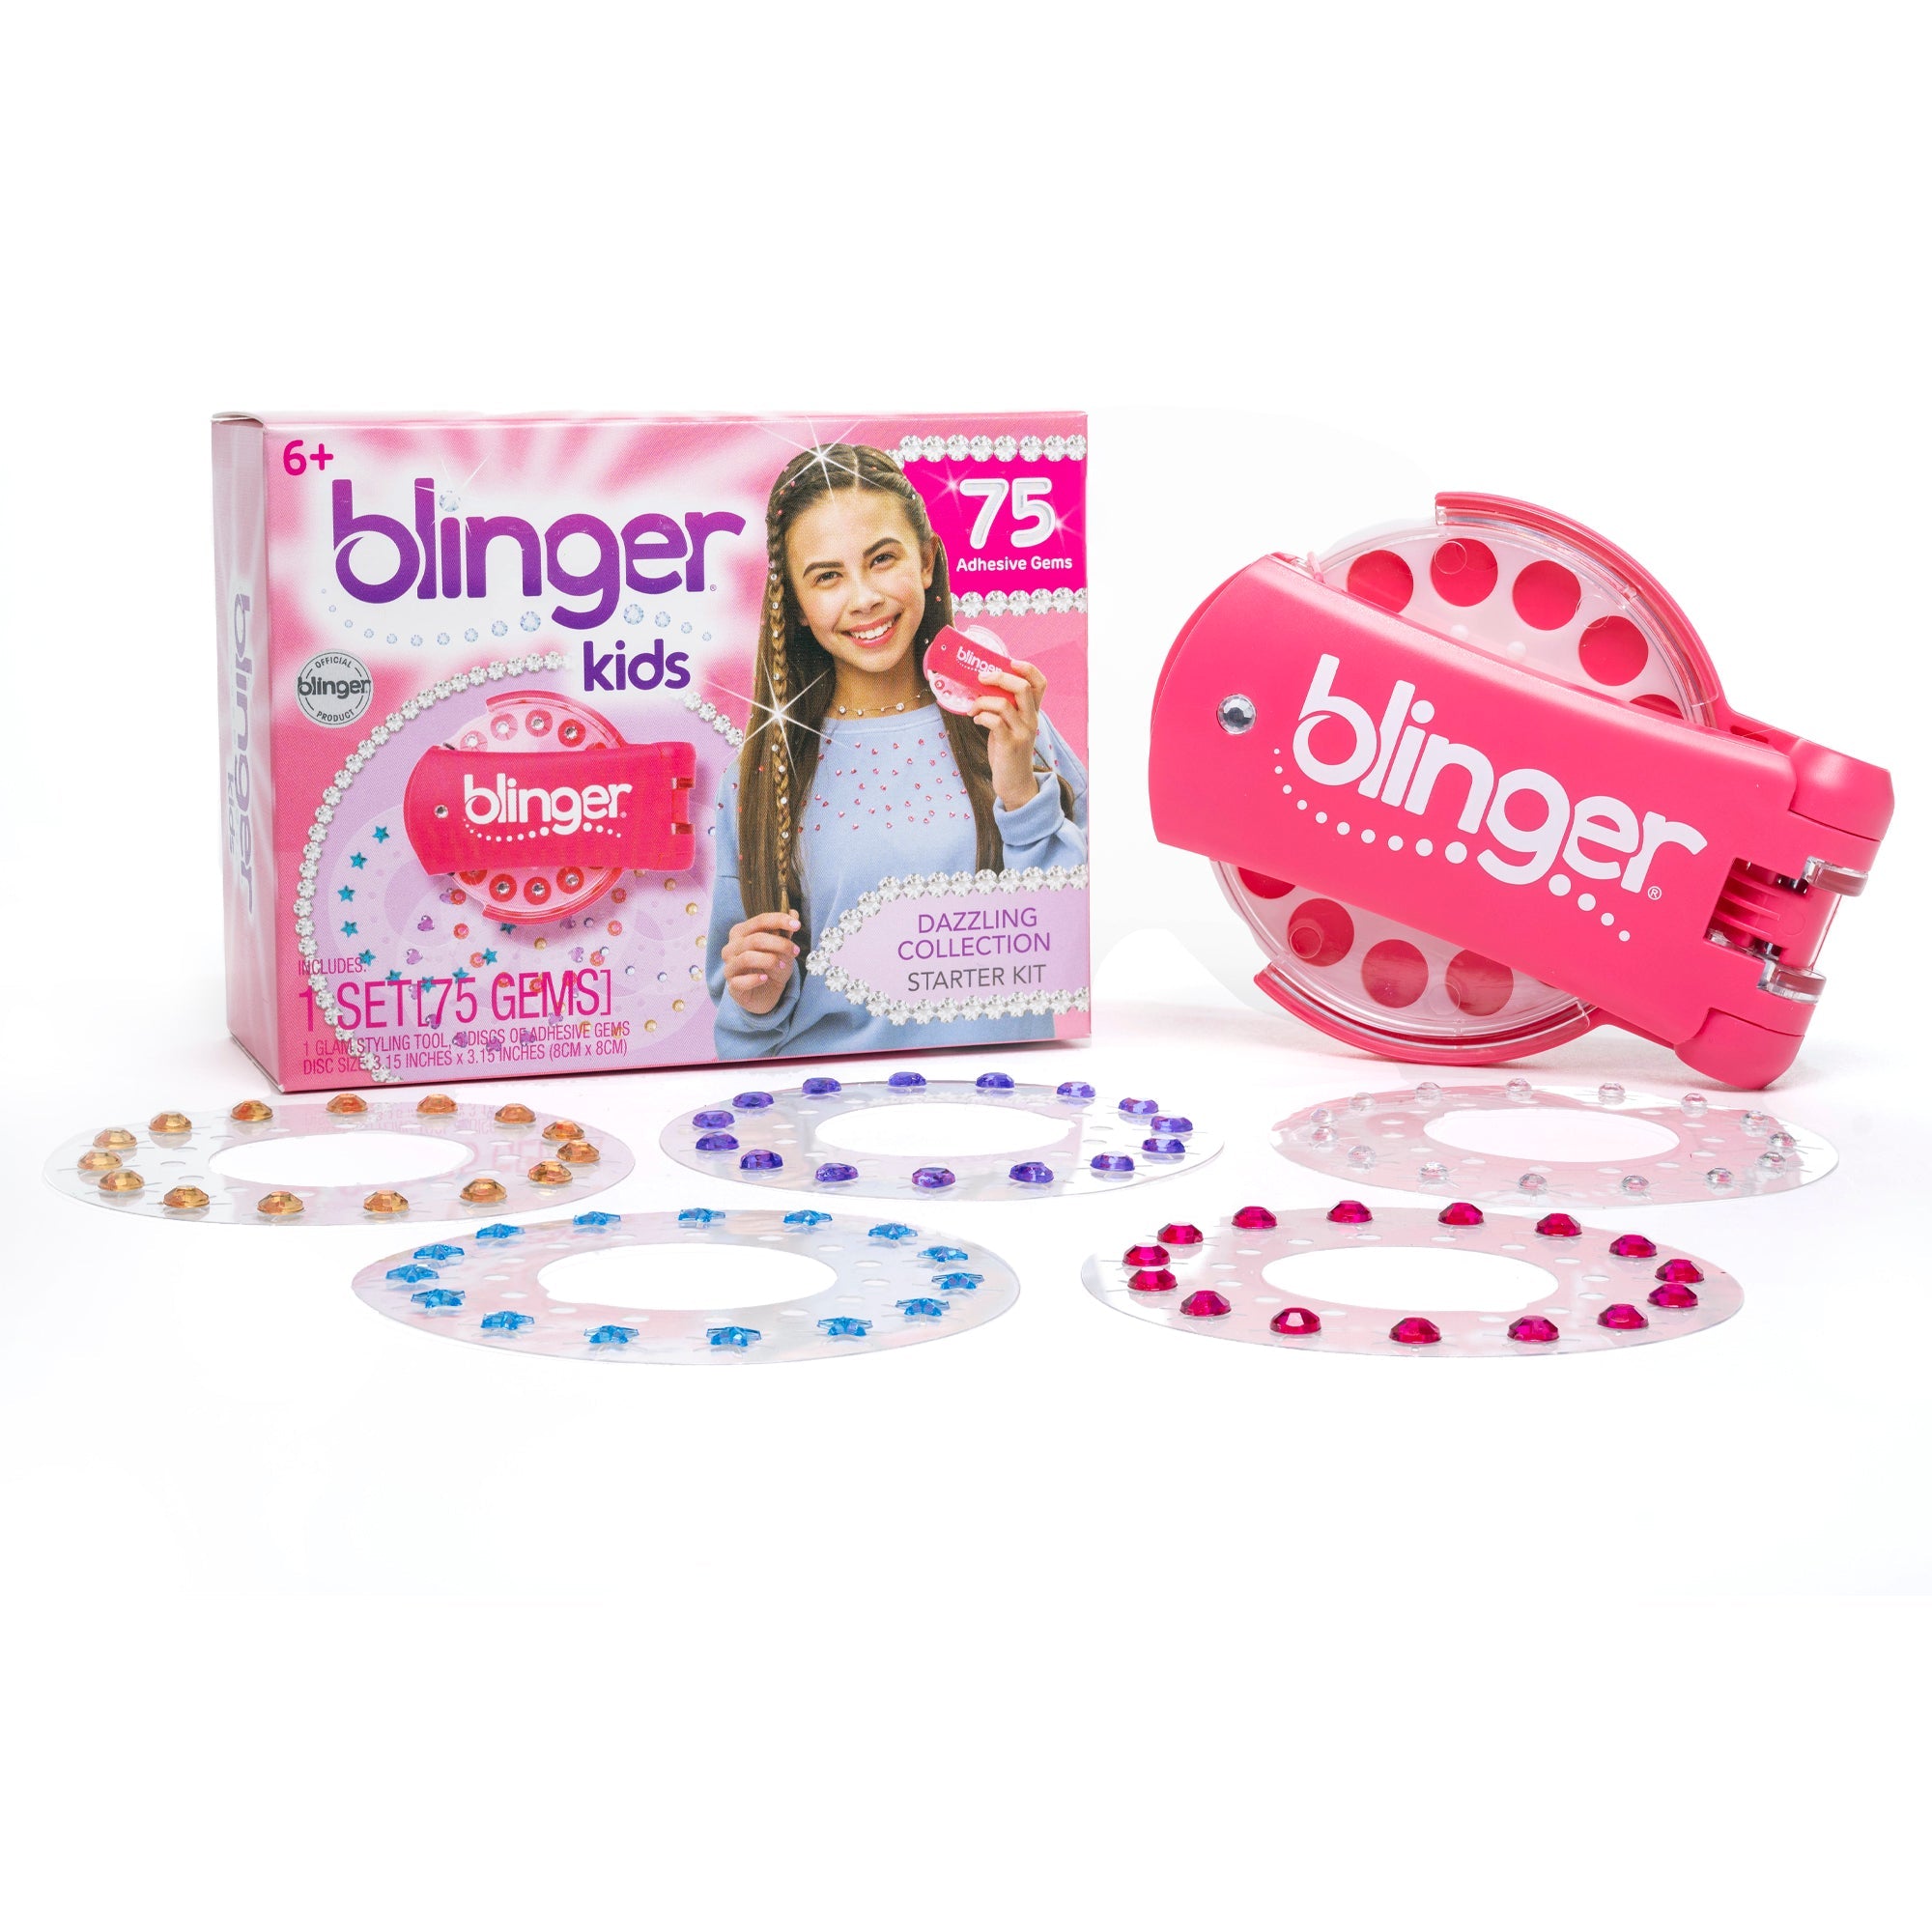 Blinger Jewel Refill Set - Includes 180 Gems in Multiple Shapes and Colors